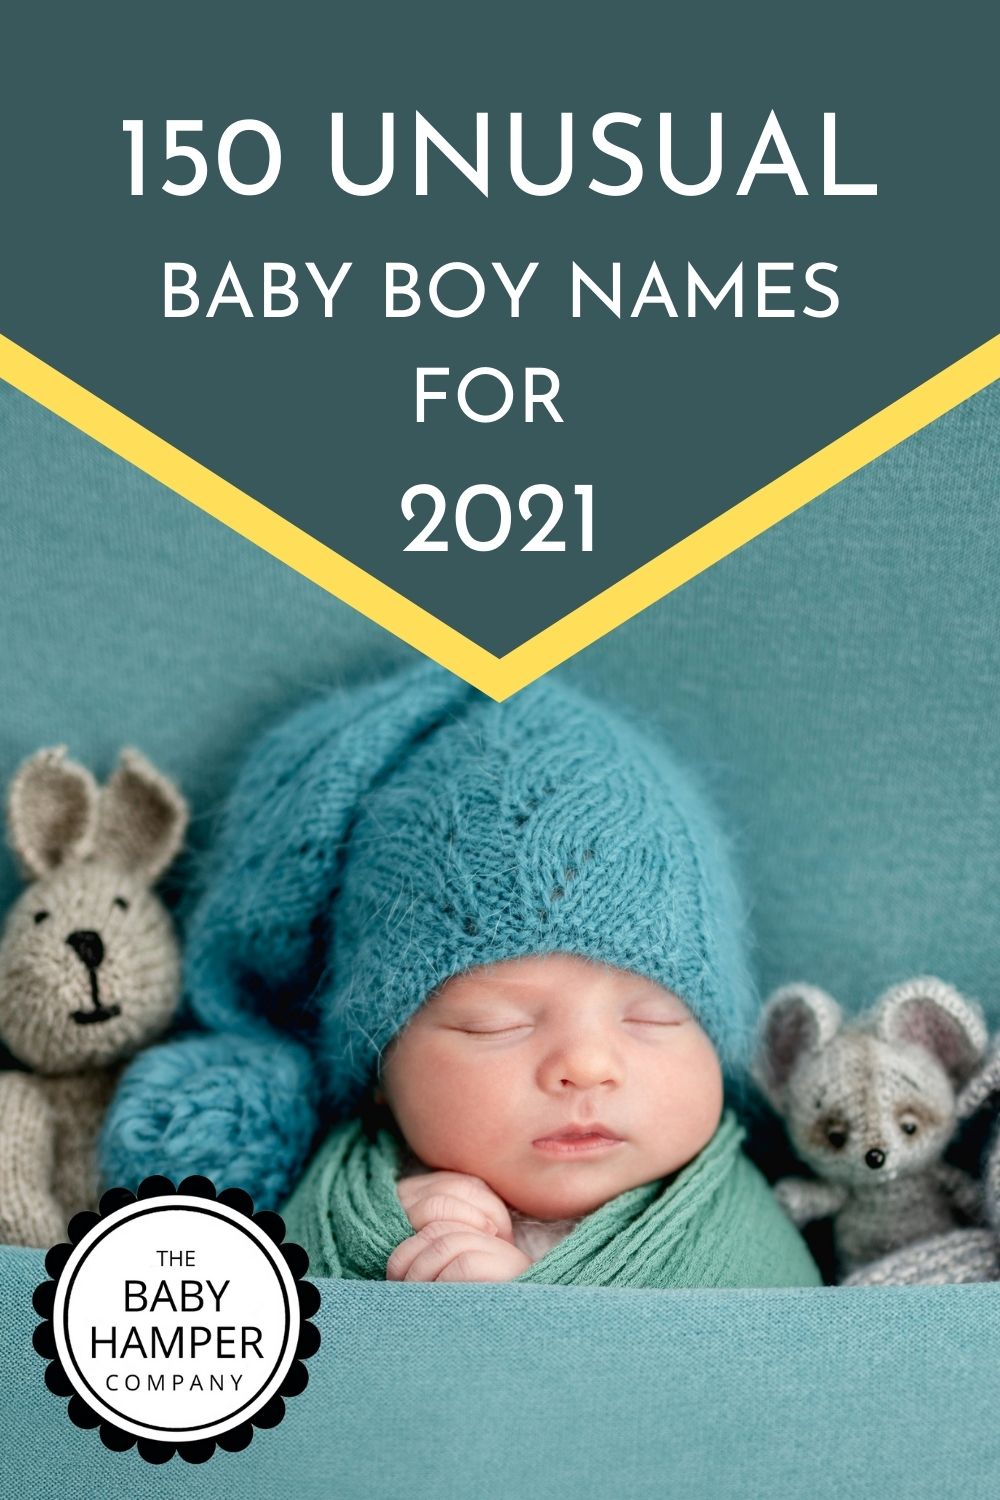 150 Unusual Baby Boy Names for 2021